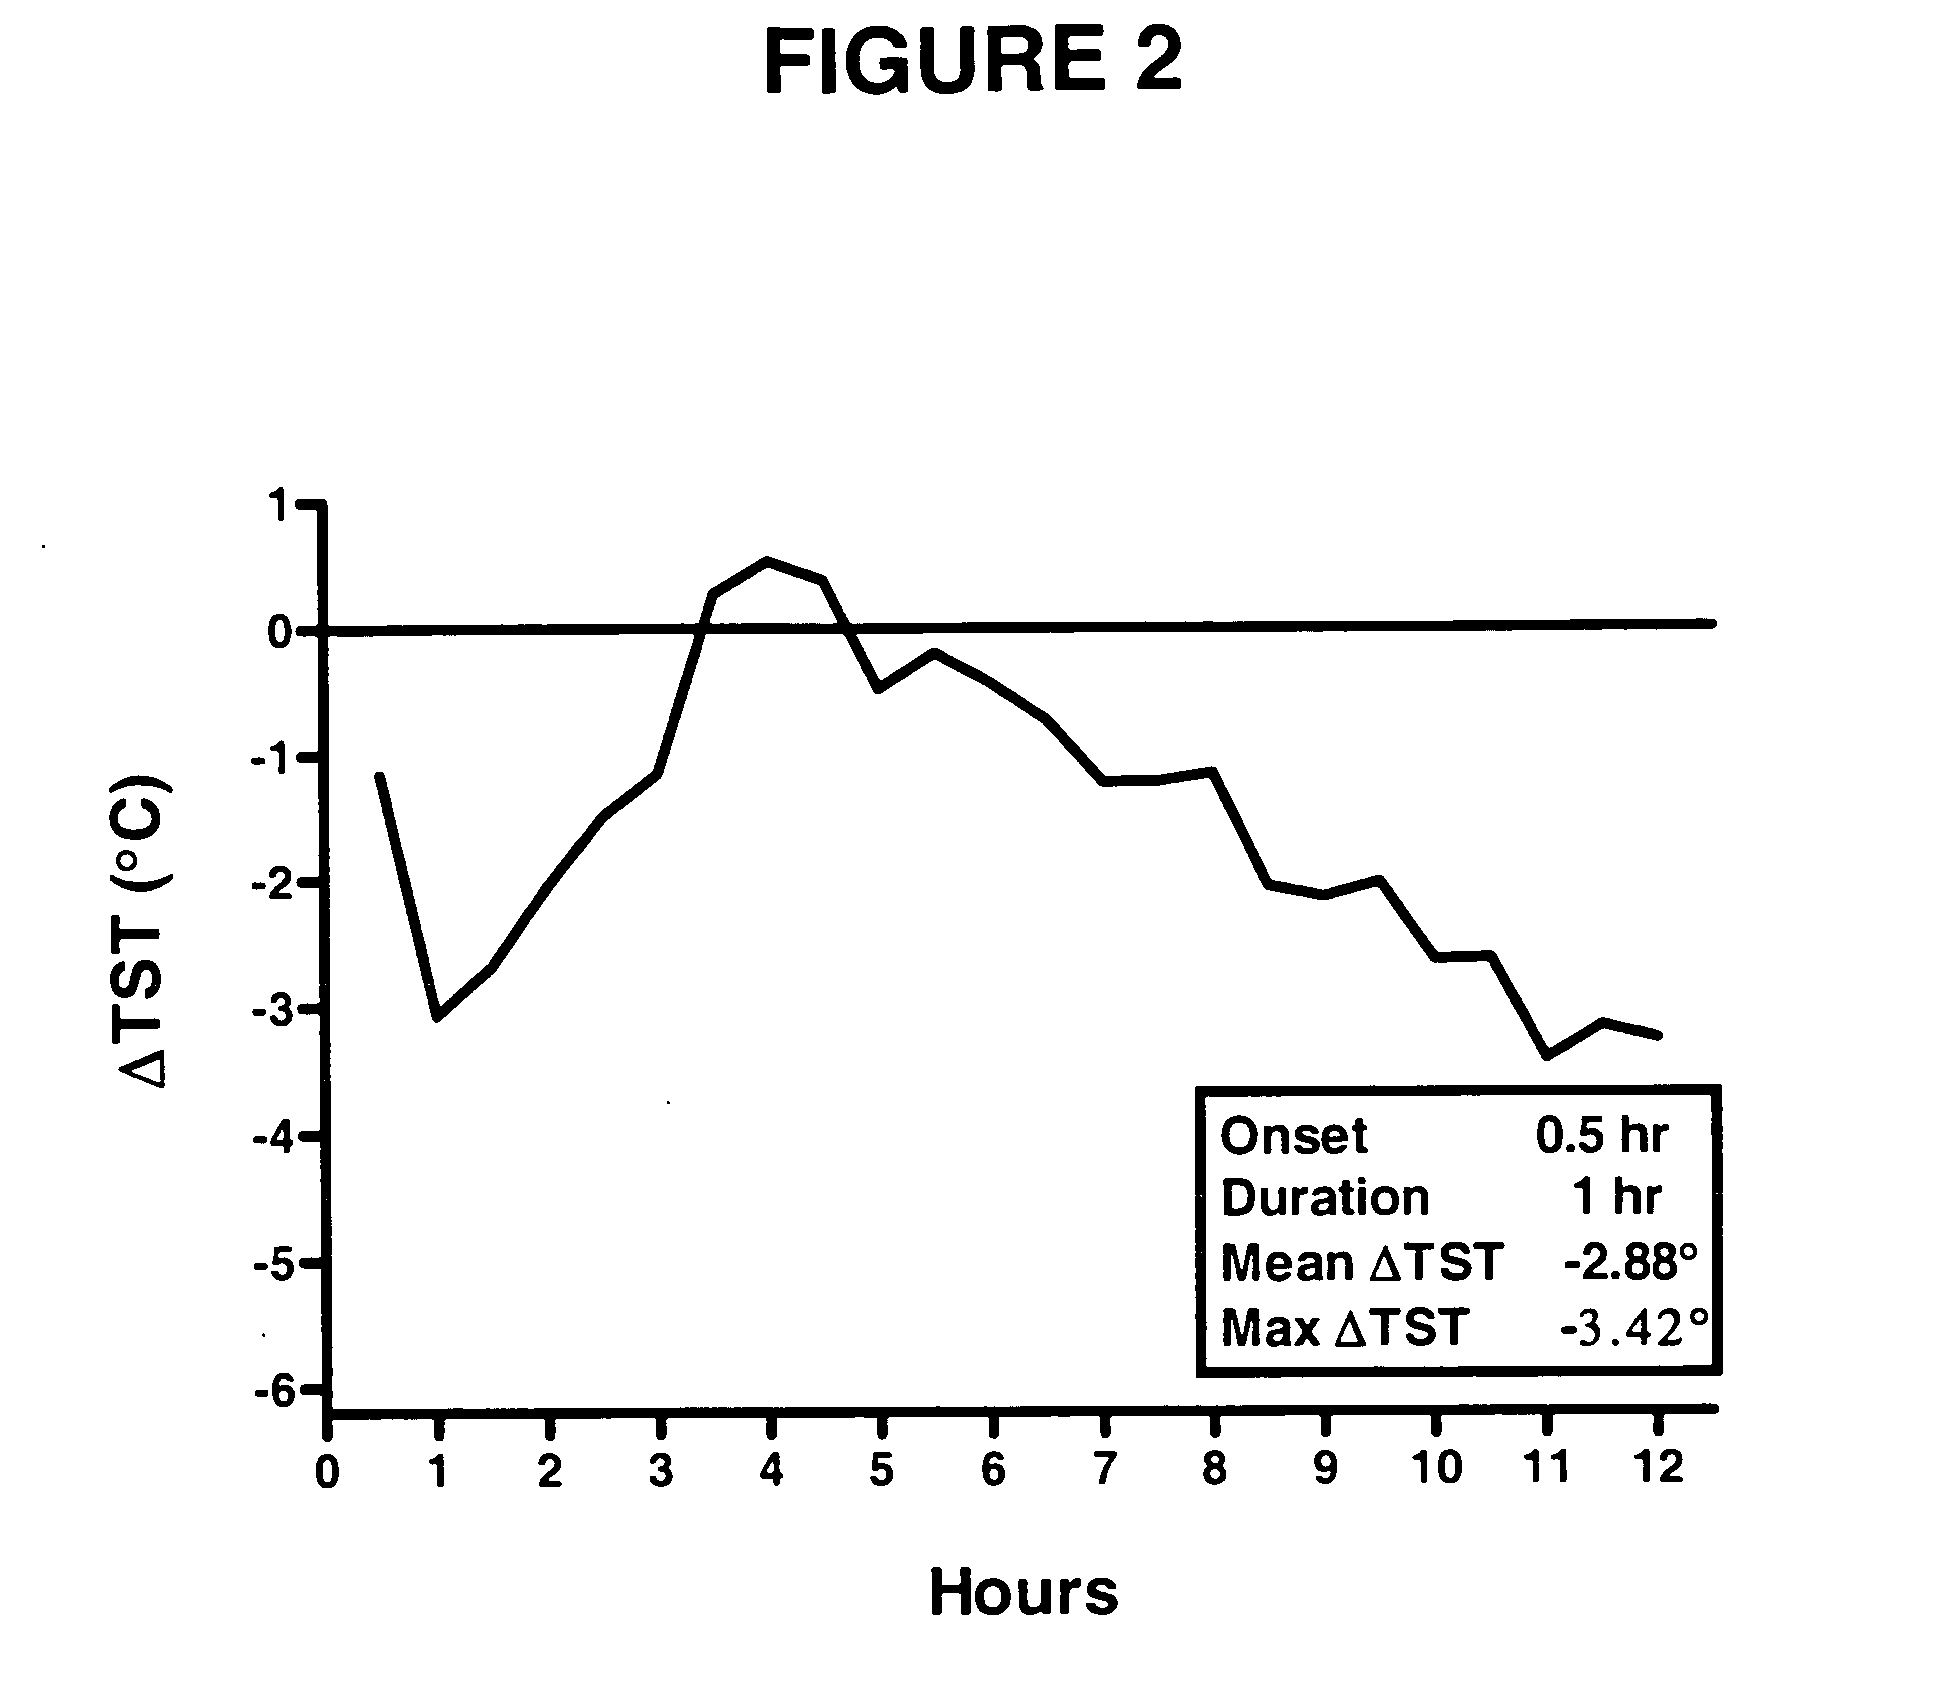 Method for treating nervous system disorders and conditions